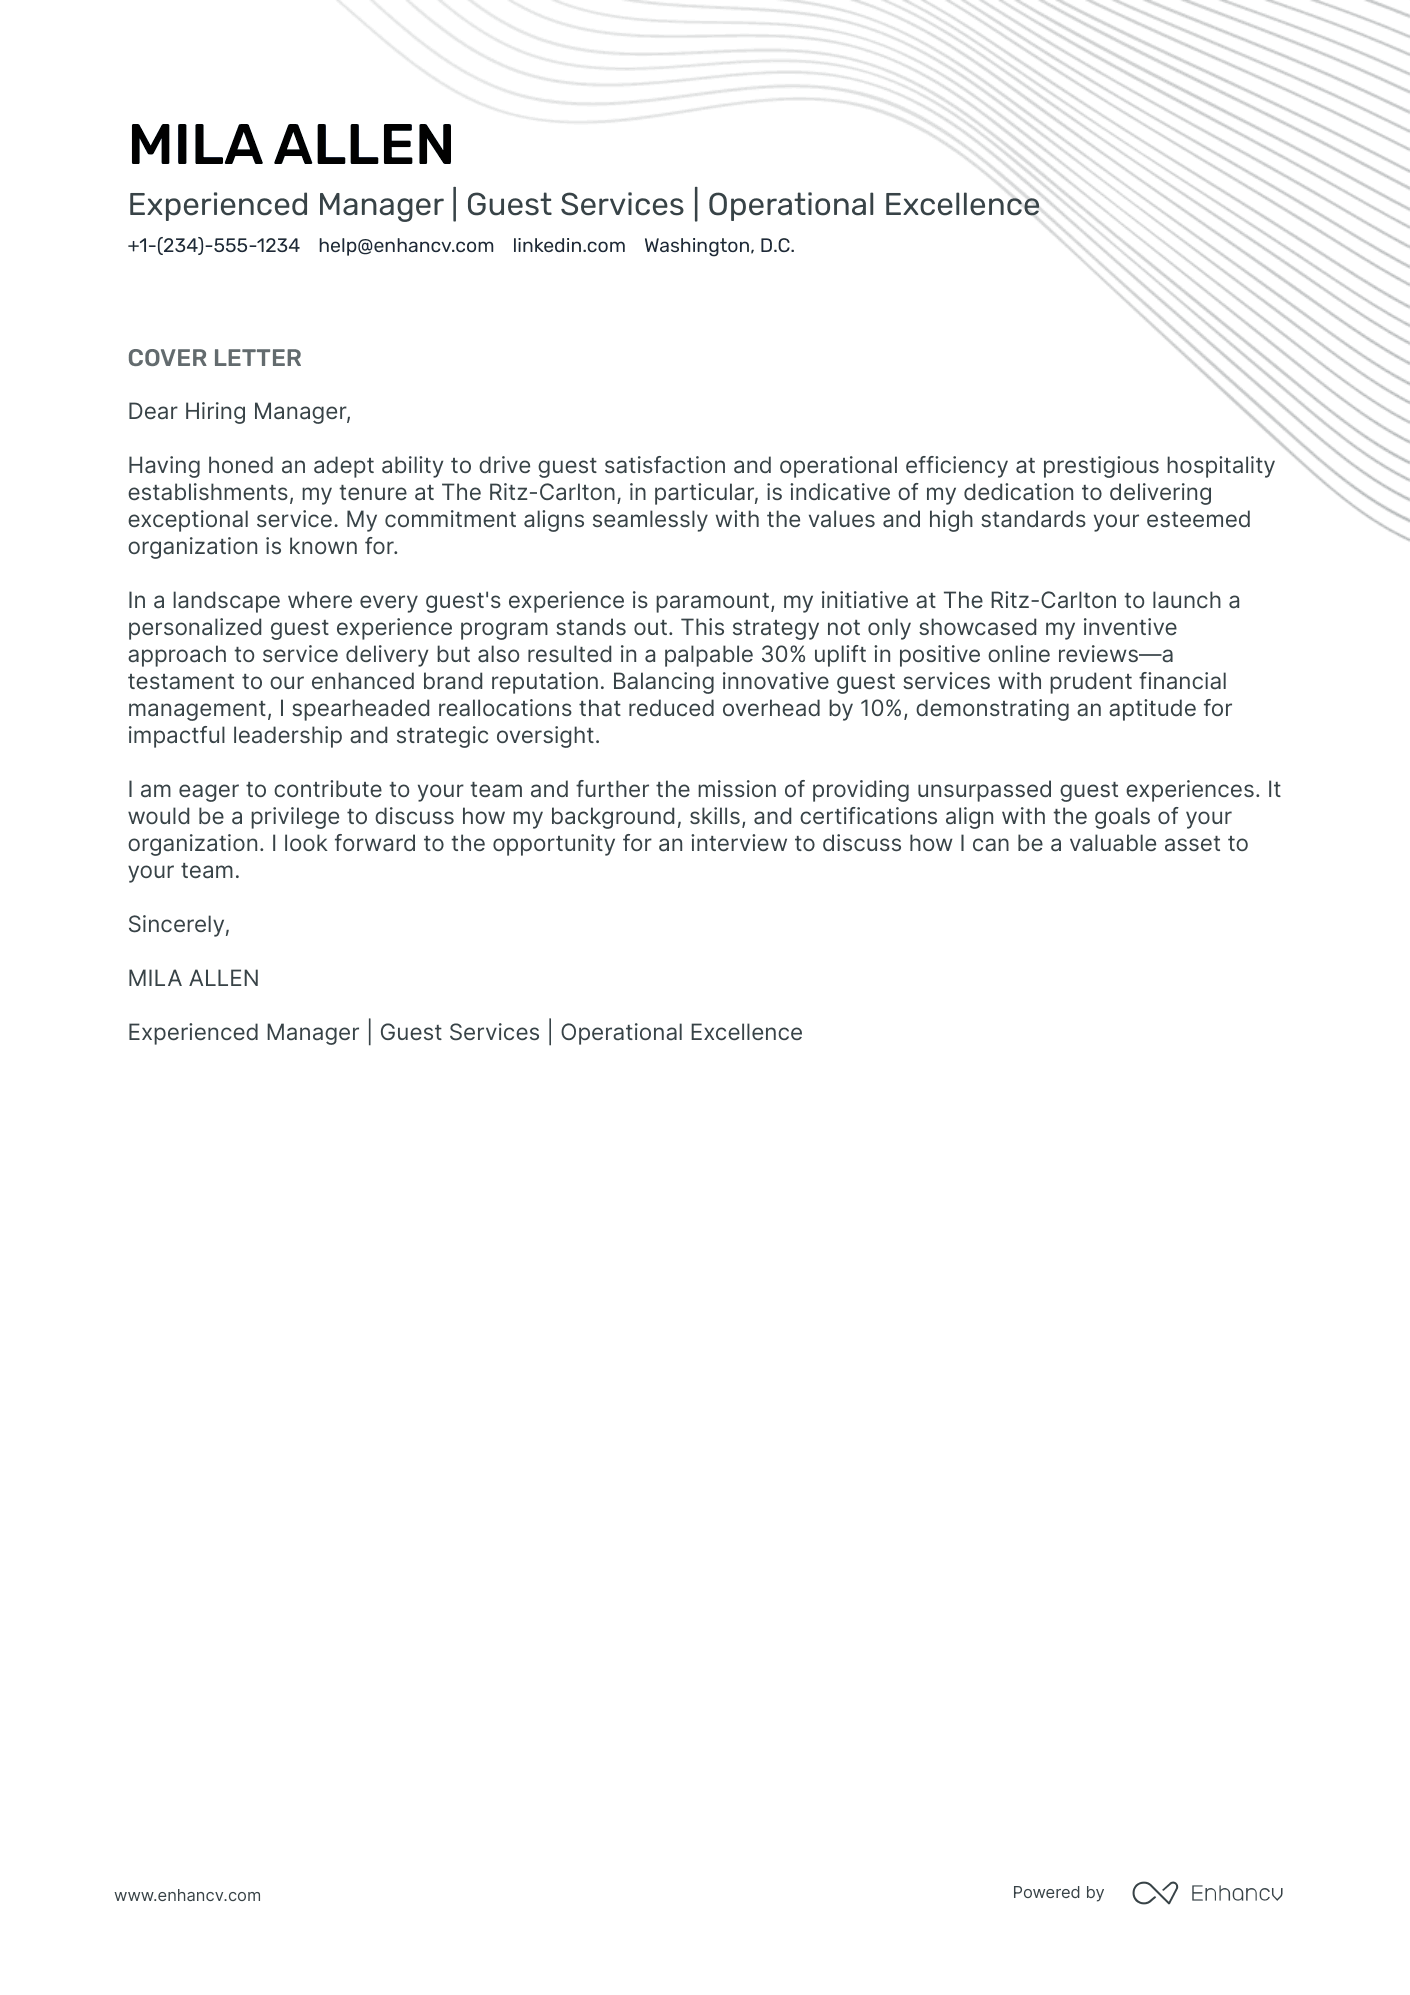 Rooms Division Manager cover letter